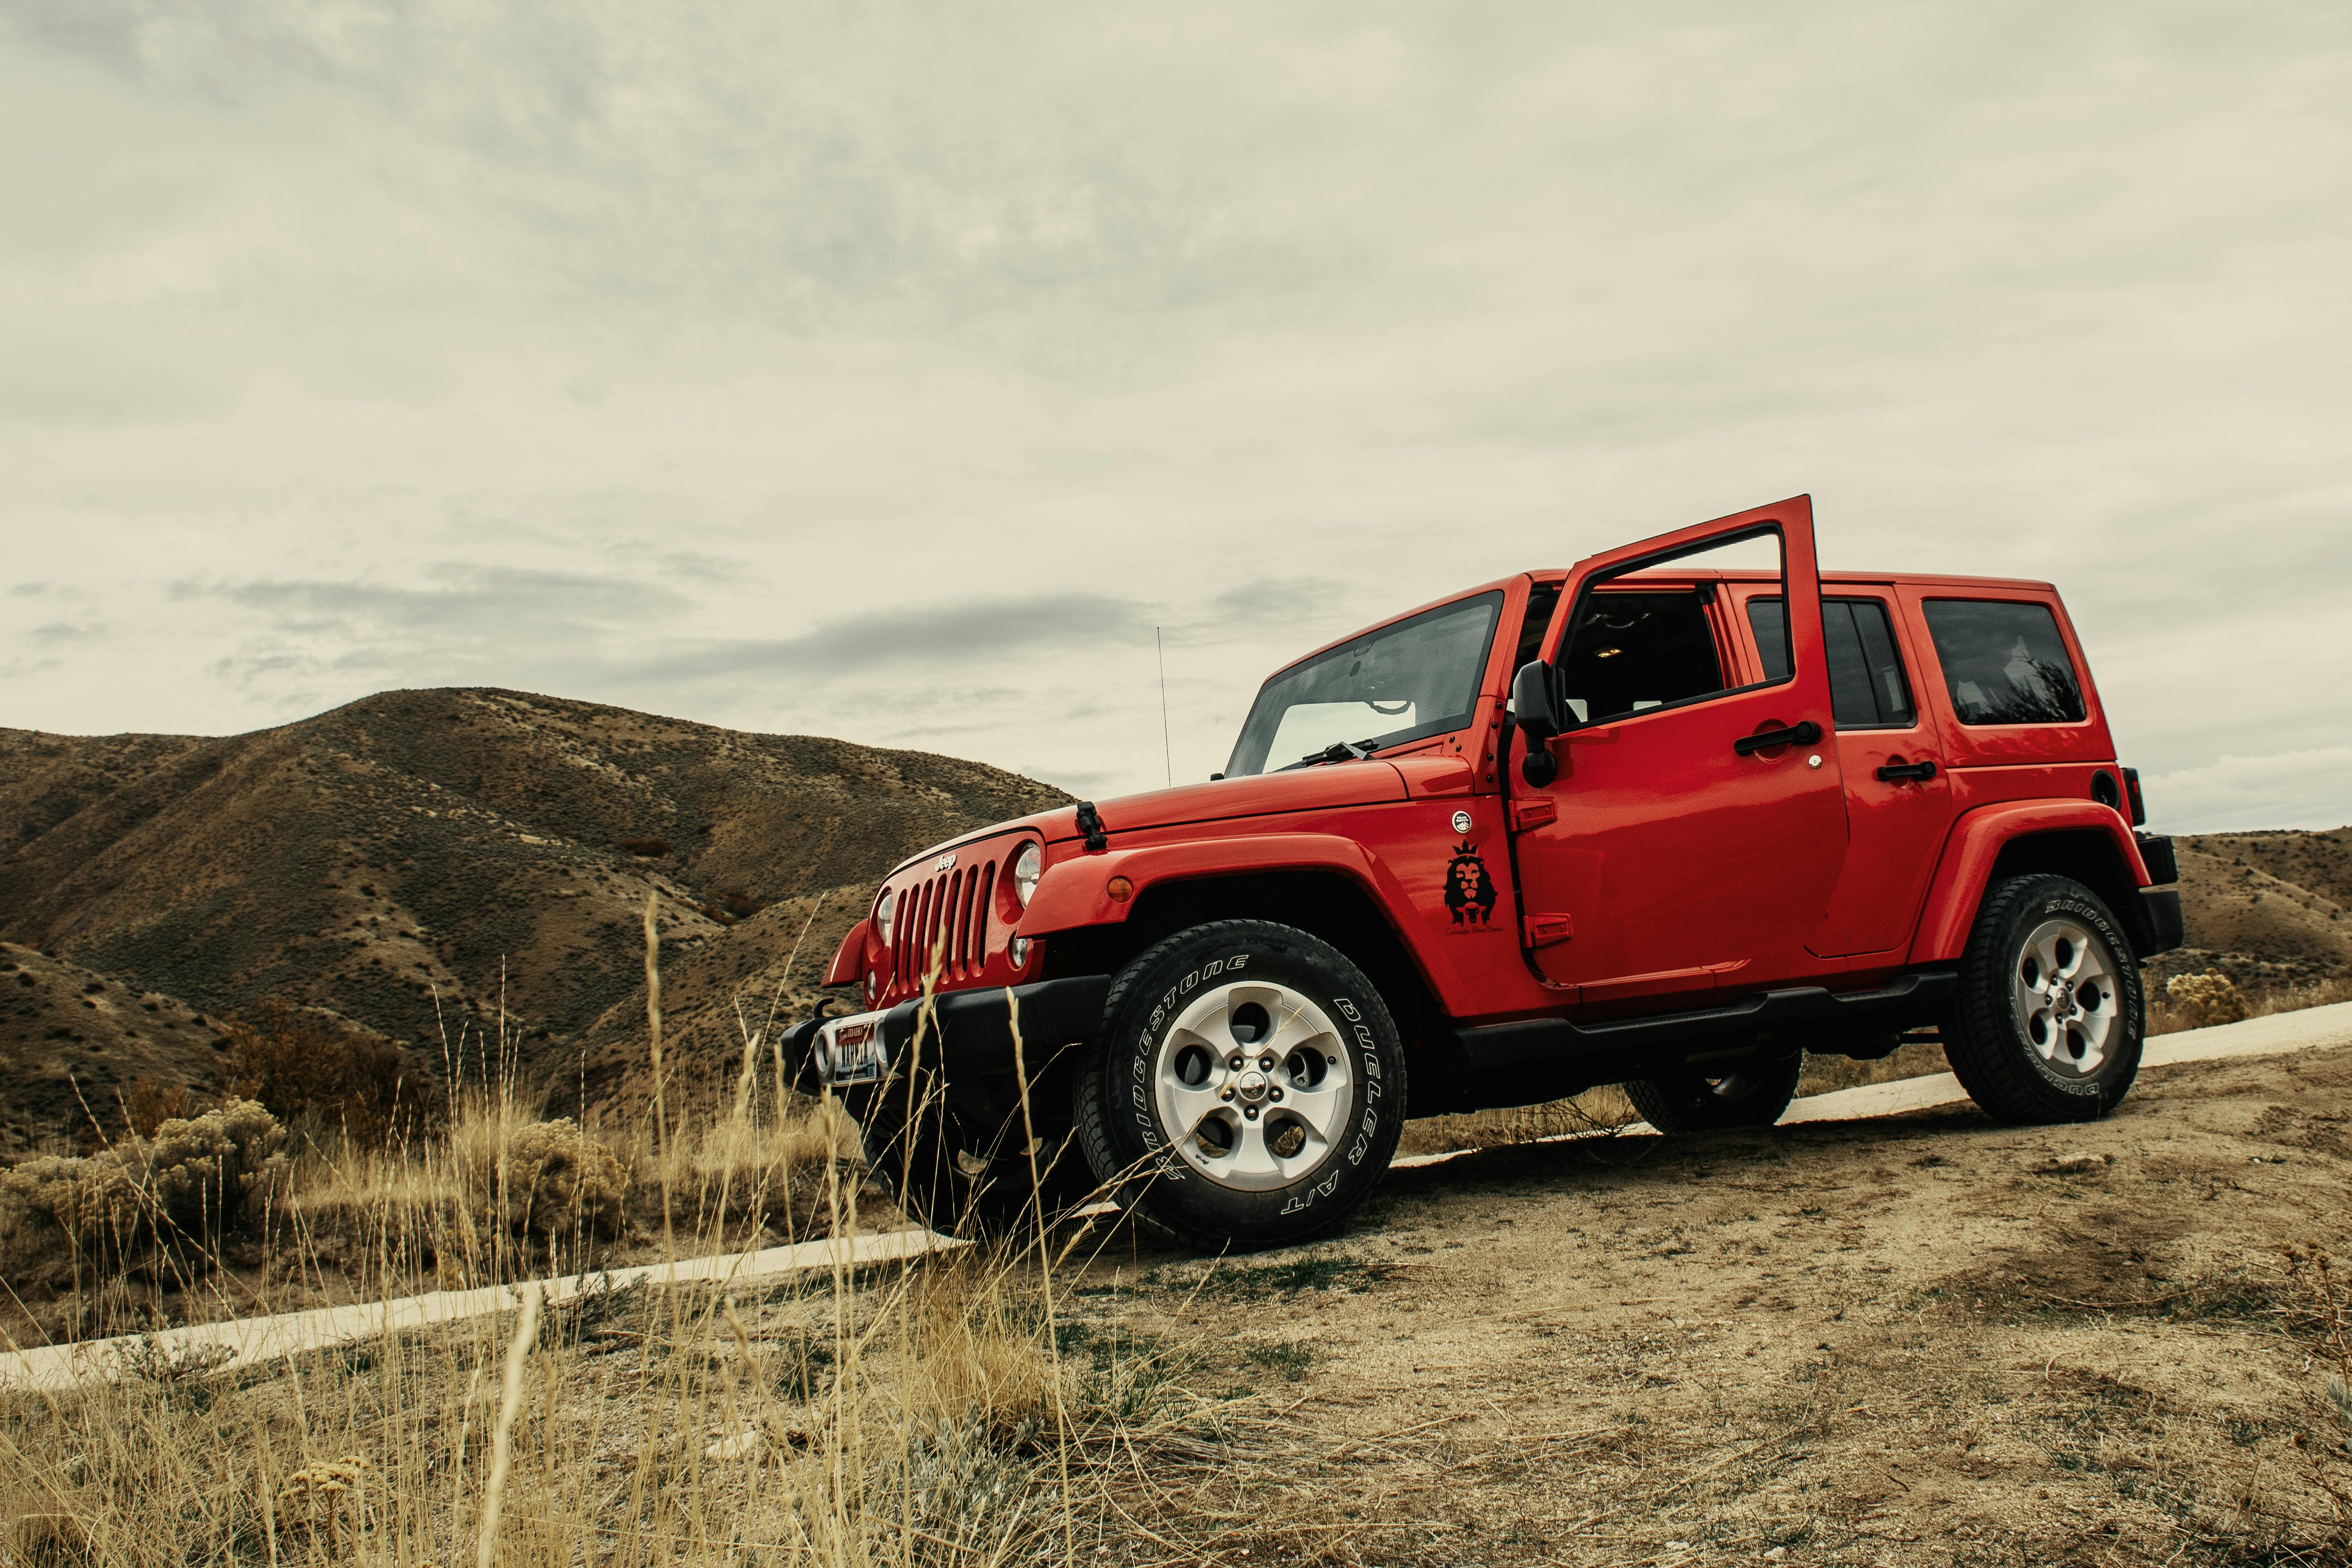 Download Jeep wallpapers for mobile phone free Jeep HD pictures